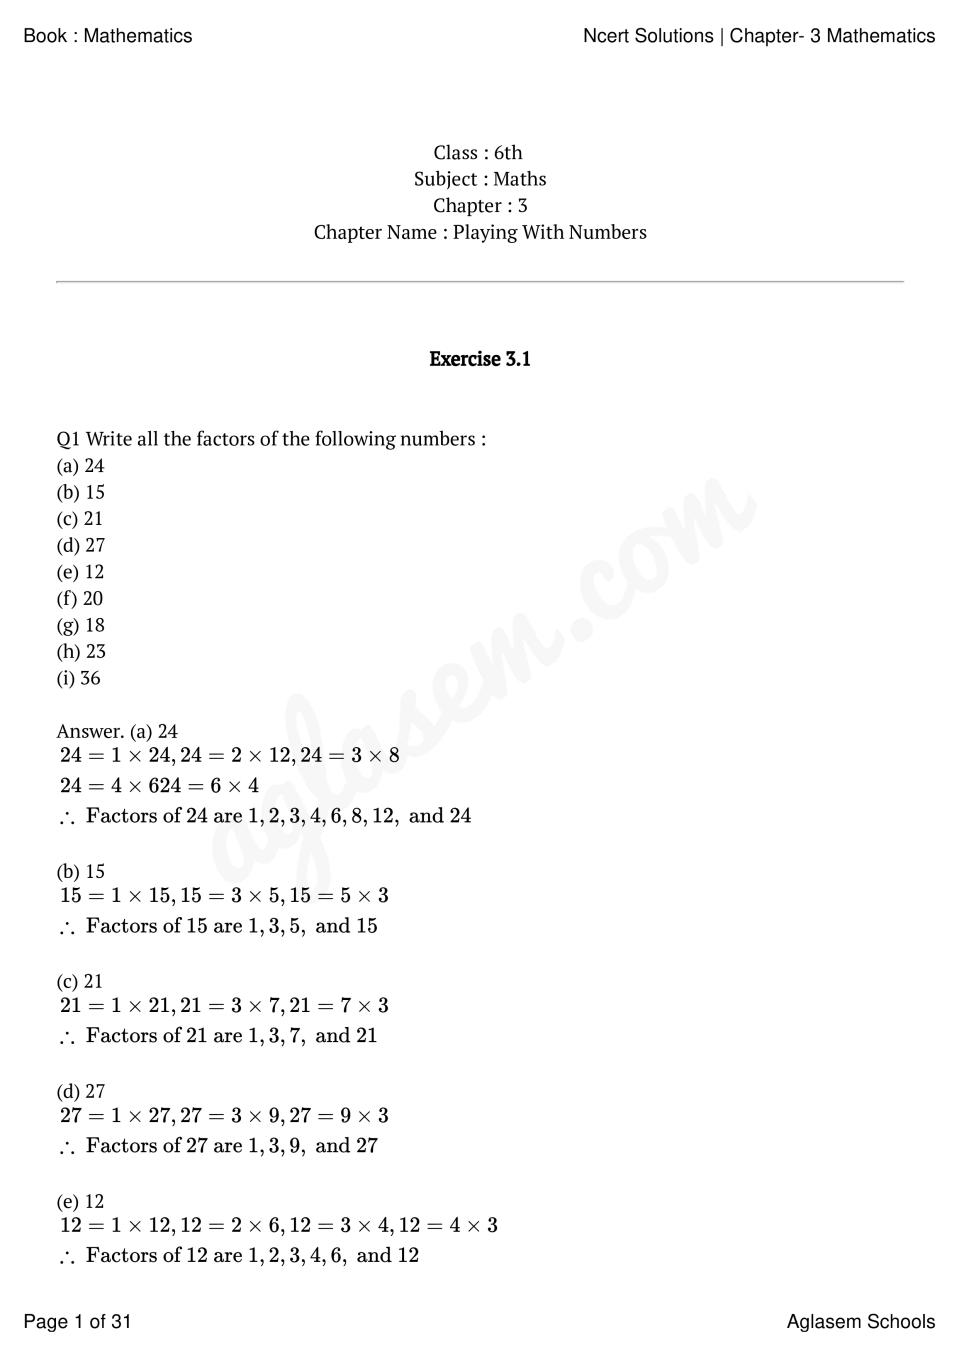 cbse-class-6-maths-chapter-3-playing-with-numbers-solutions-cbse-study-group